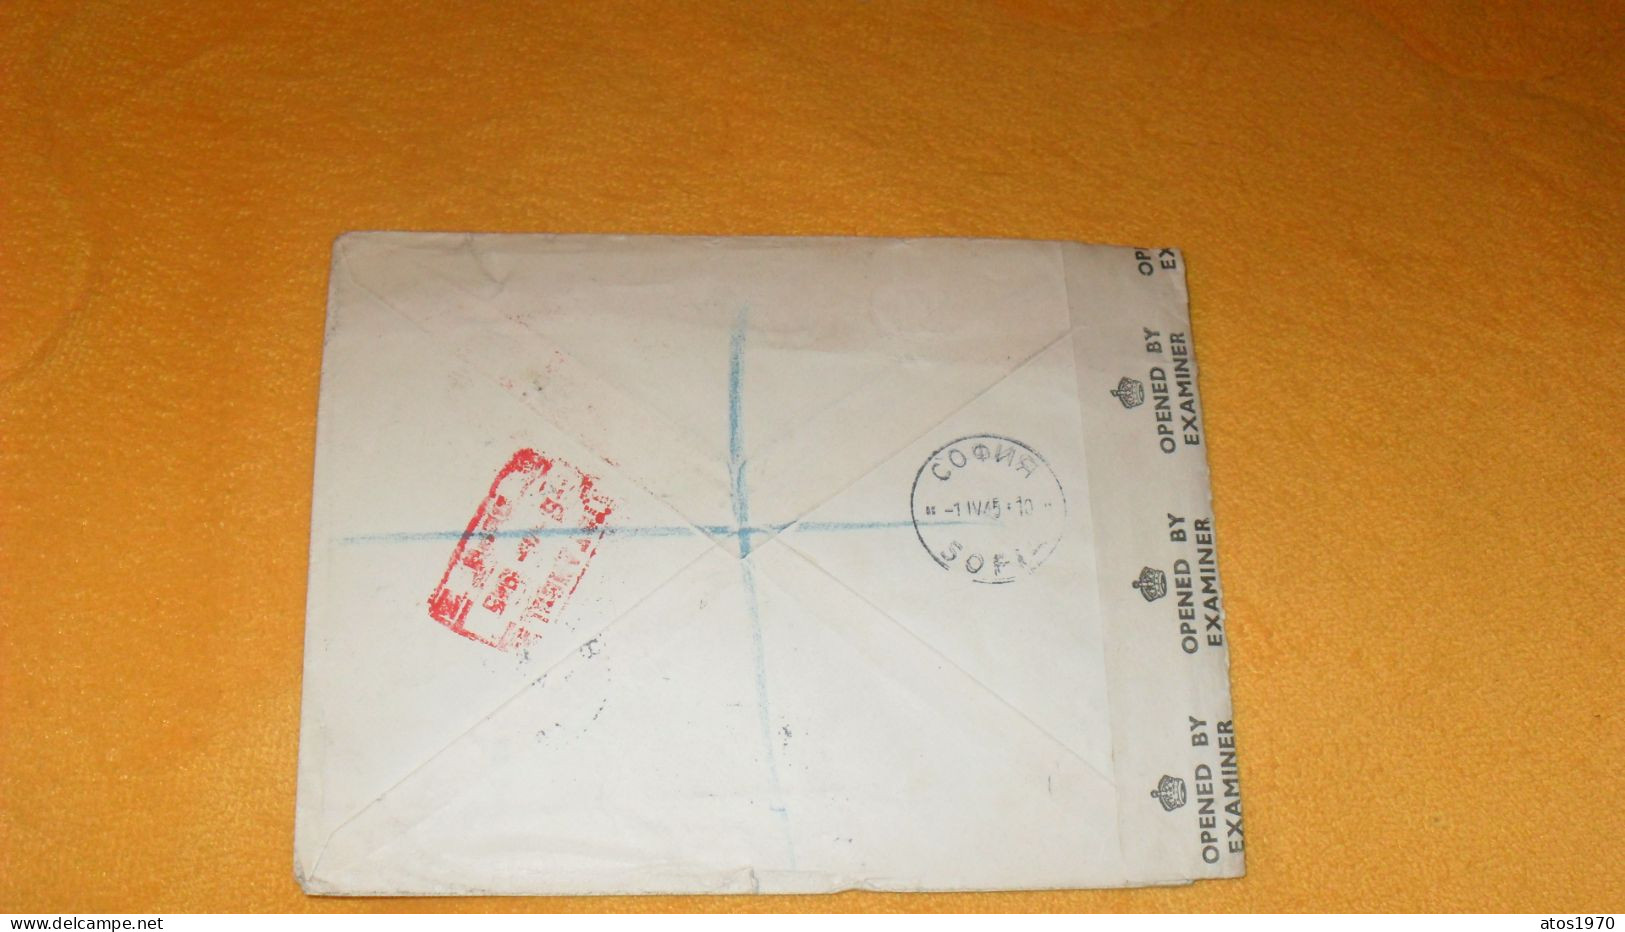 ENVELOPPE ANCIENNE DE 1945../ GEORGES T. PETROFF & CIE IMPORTATION...VARNA BULGARIE OPENED BY EXA..CACHETS + TIMBRES X3 - Brieven En Documenten